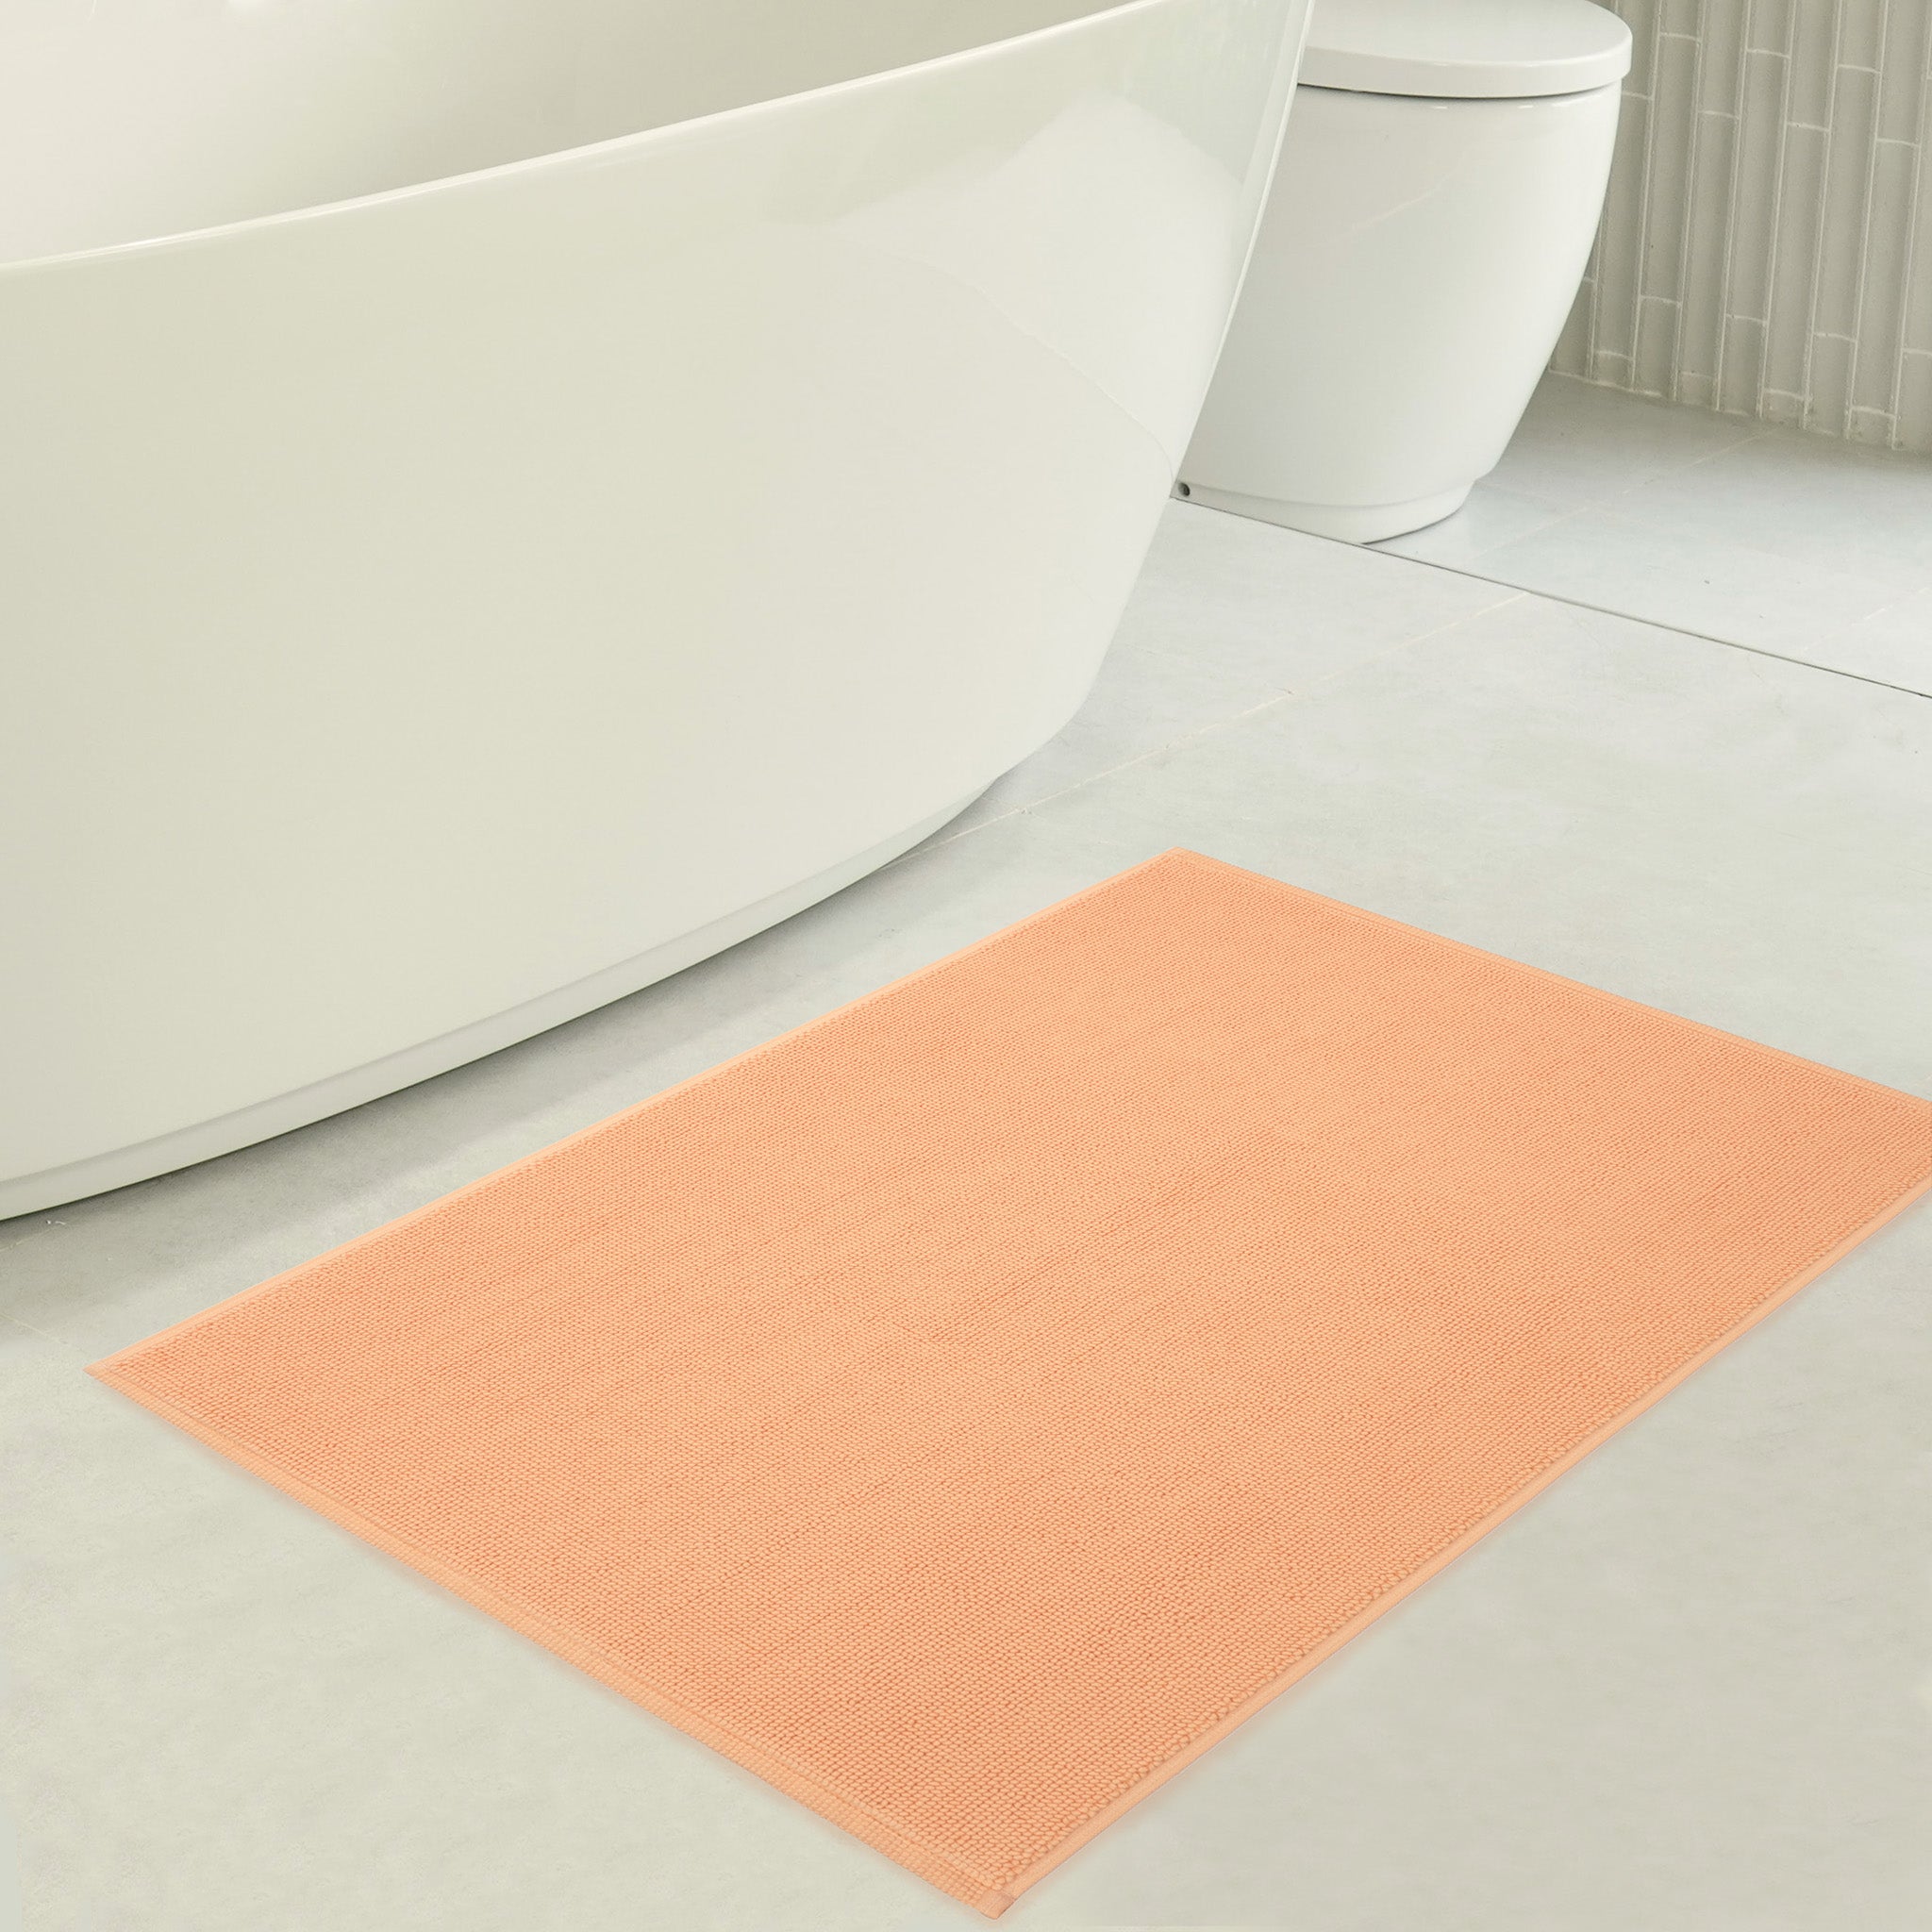 HOME WEAVERS INC Allure Collection 17 in. x 24 in. Orange Cotton Bath Rug  BALL1724CO - The Home Depot